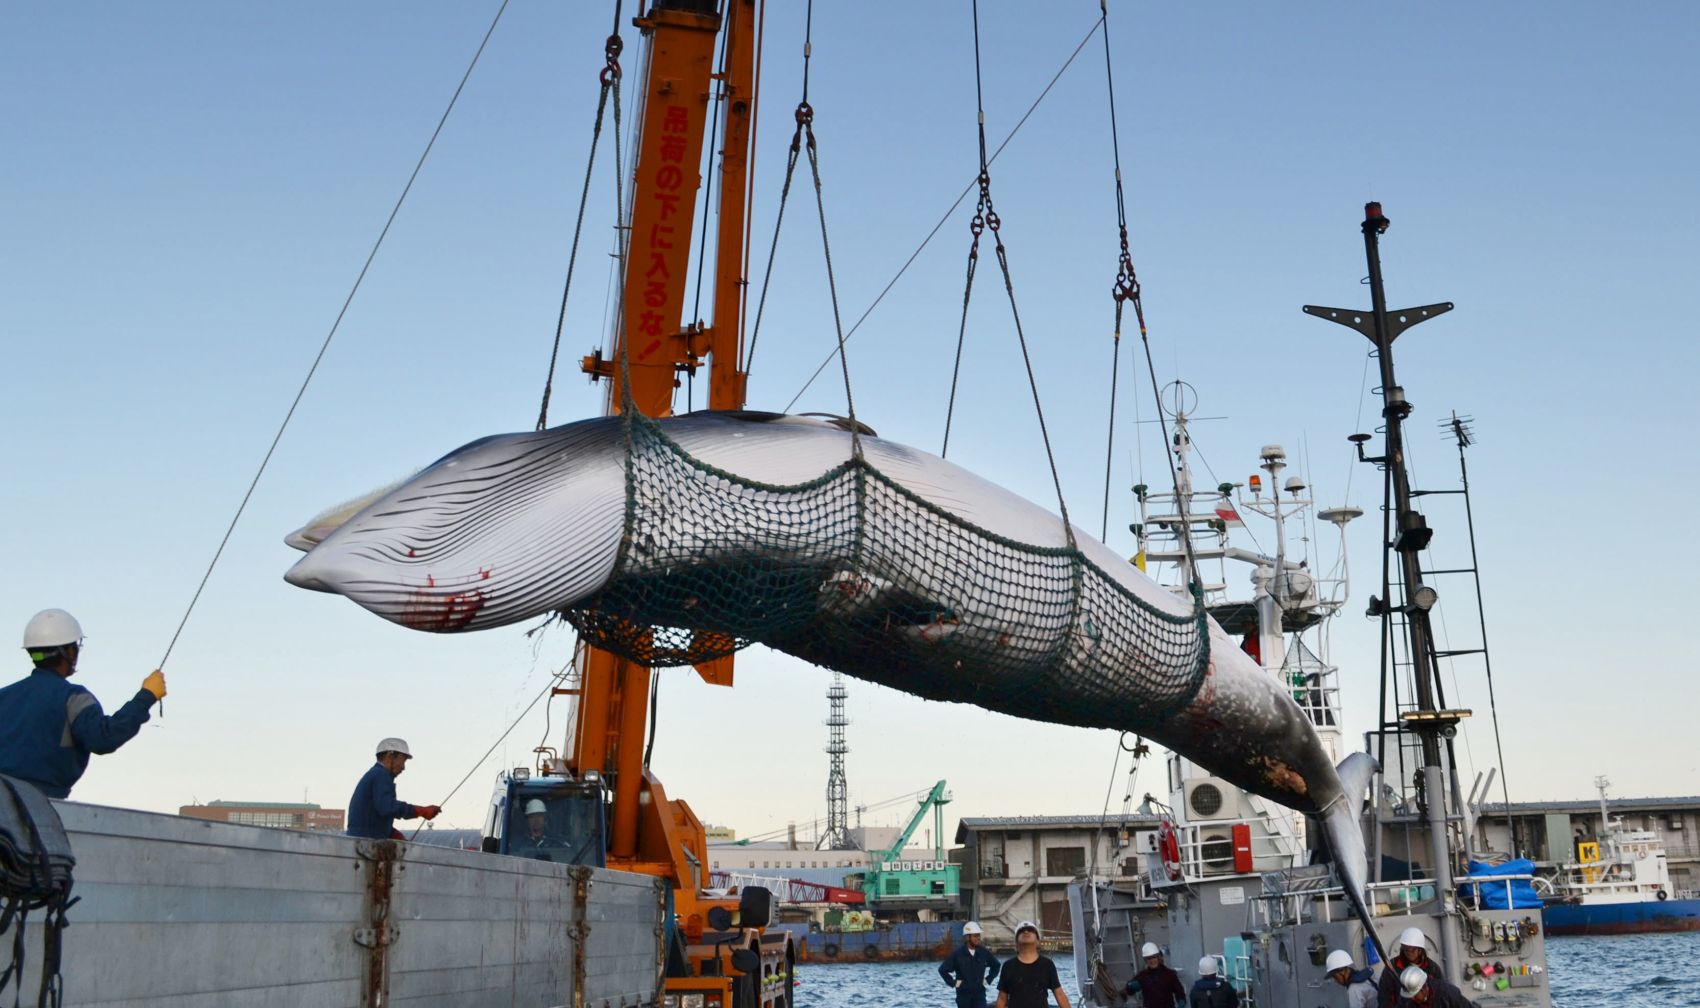 Whaling is Barbaric? Criticisms of Japan Are Without Scientific Basis